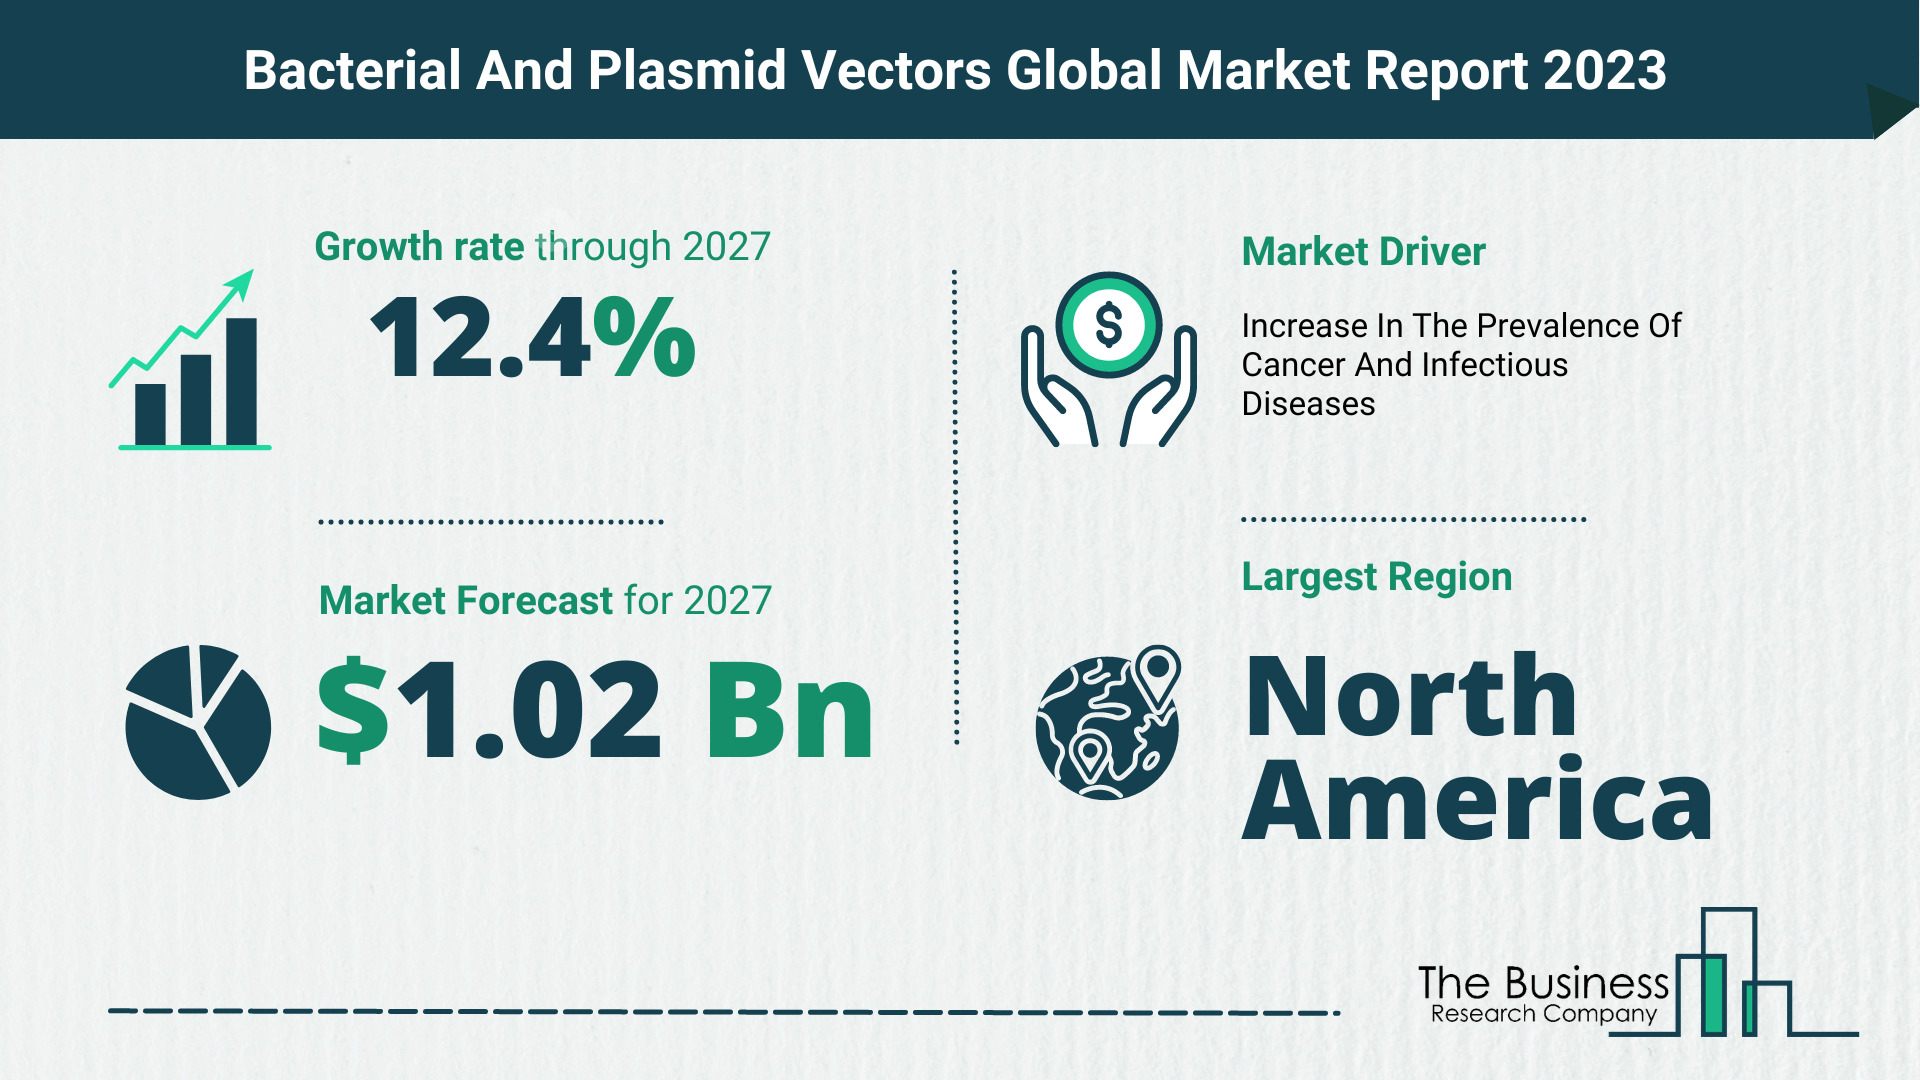 Global Bacterial And Plasmid Vectors Market Opportunities And Strategies 2023